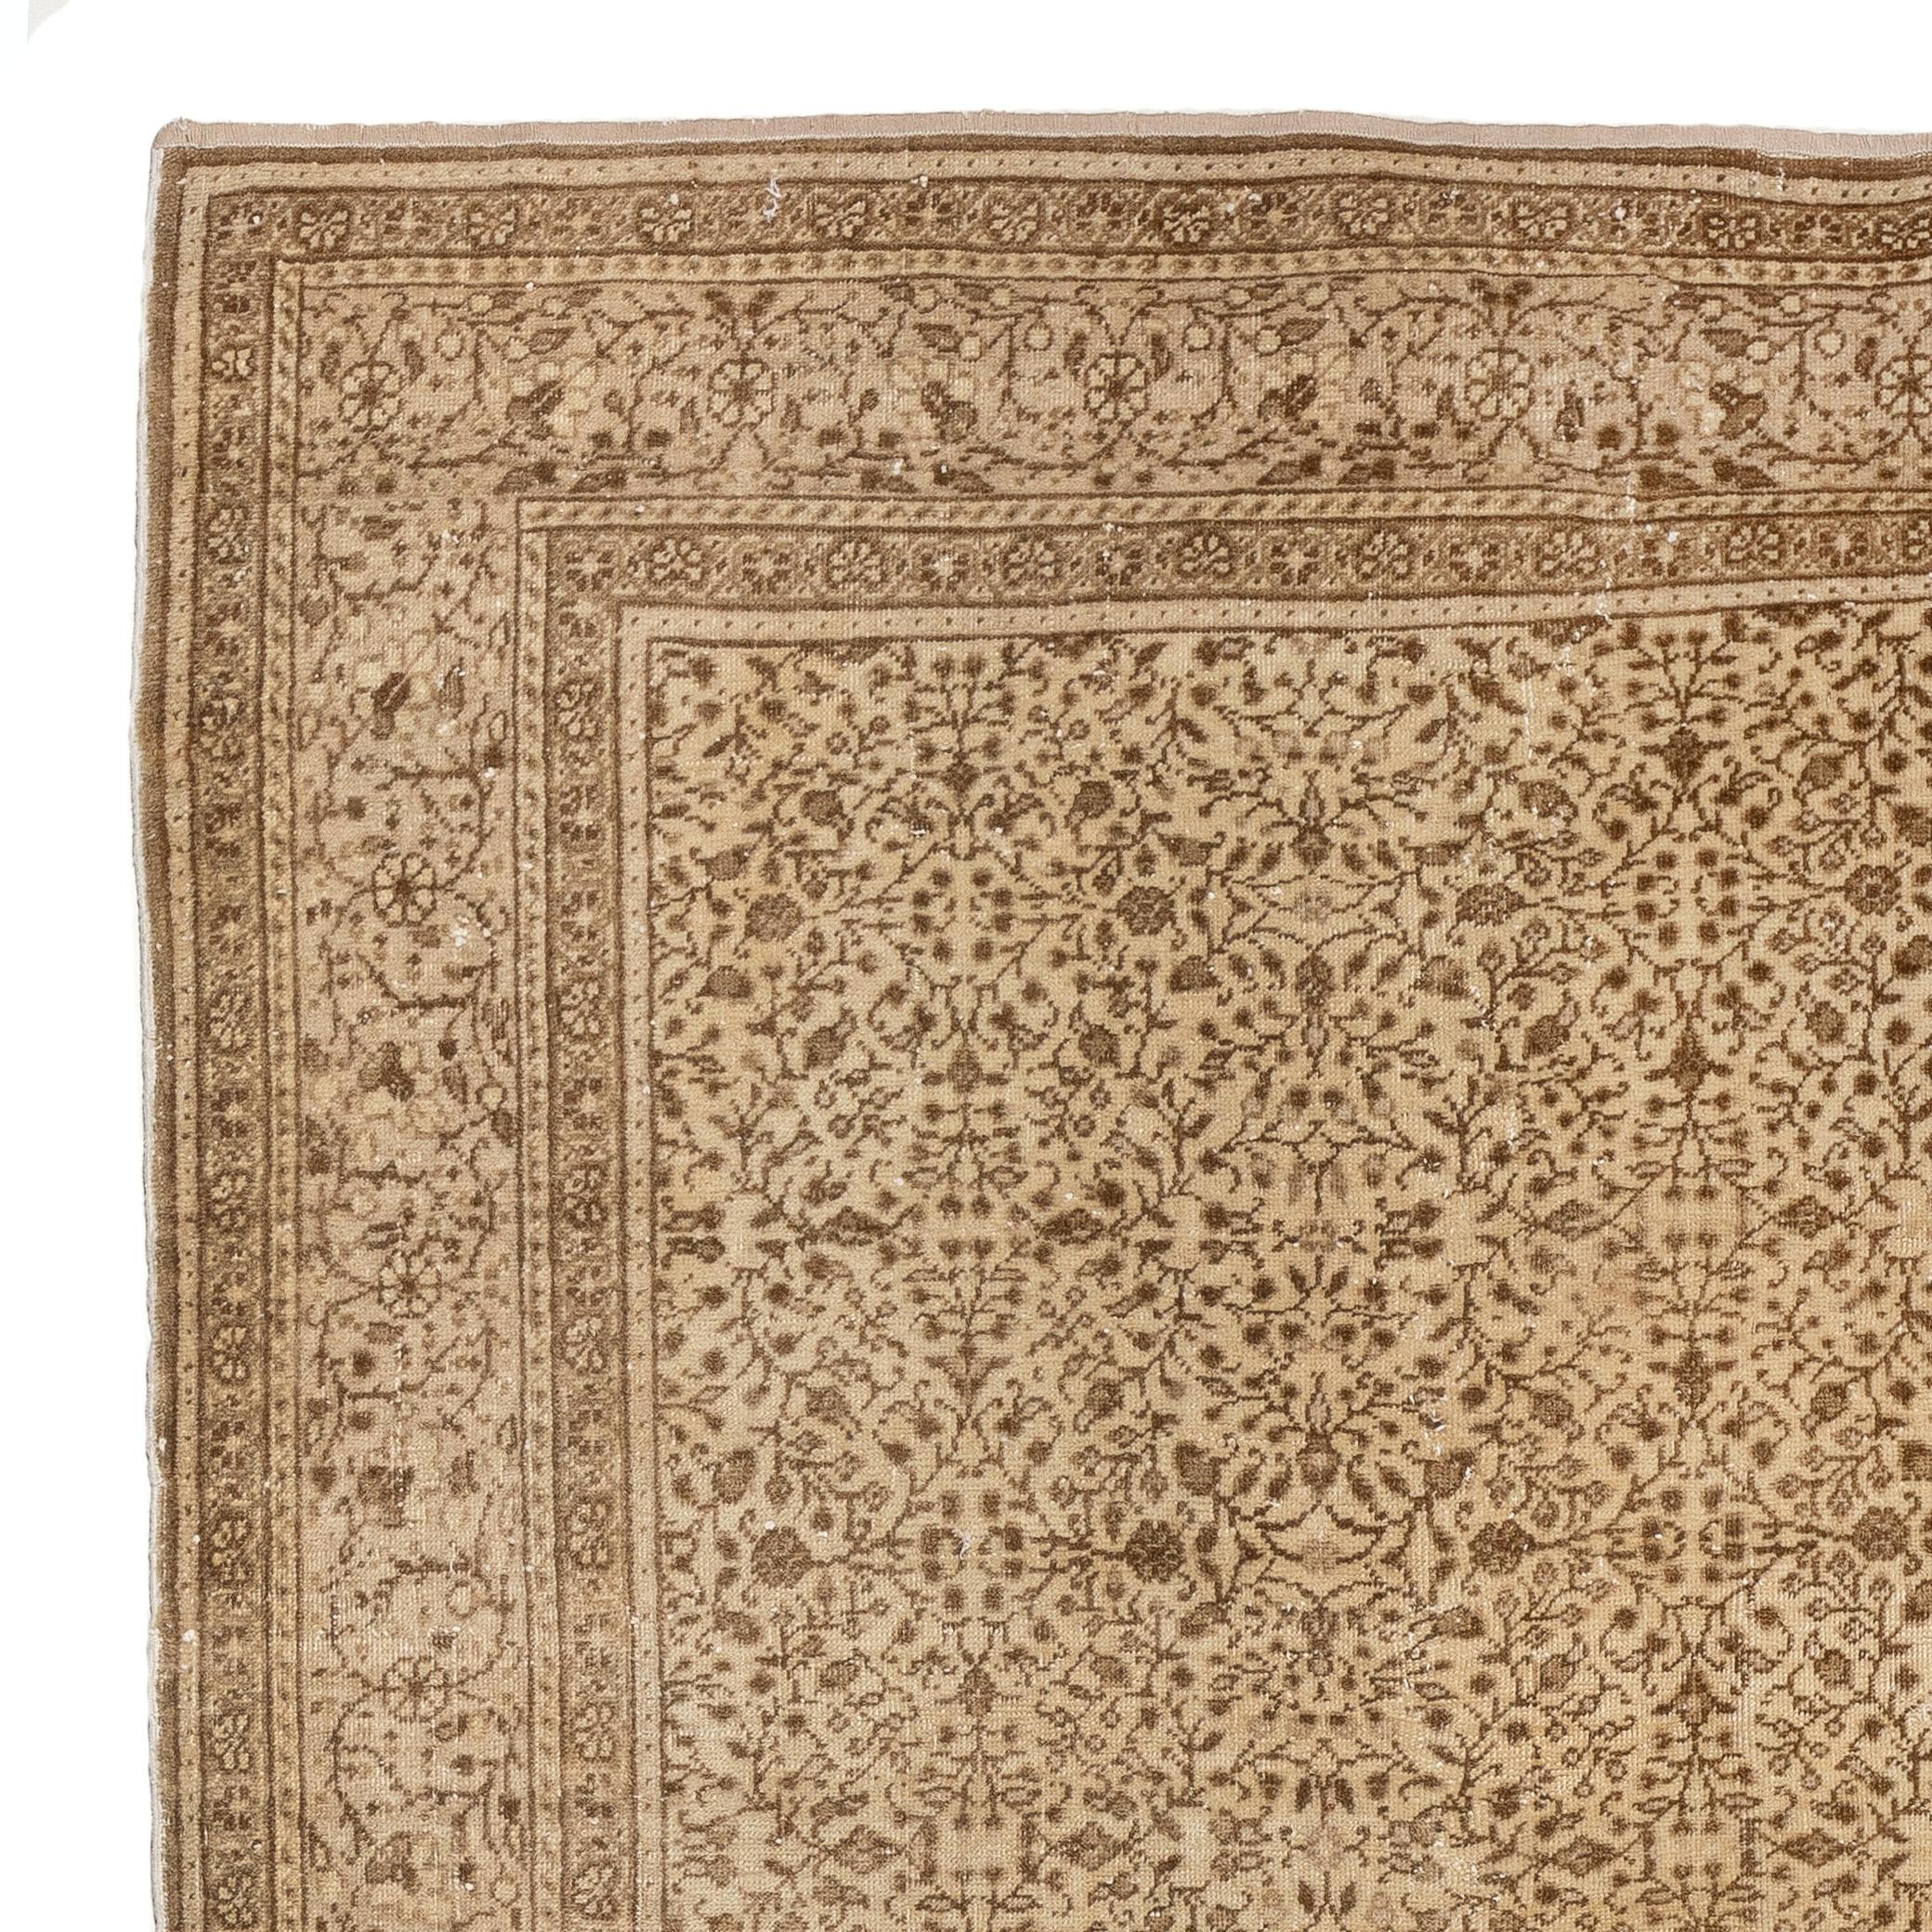 A finely hand-knotted vintage Turkish rug from 1960s featuring an intricately drawn all-over floral design in brown against a golden sand background. 

The rug has even low wool pile on cotton foundation. It is heavy and lays flat on the floor. It